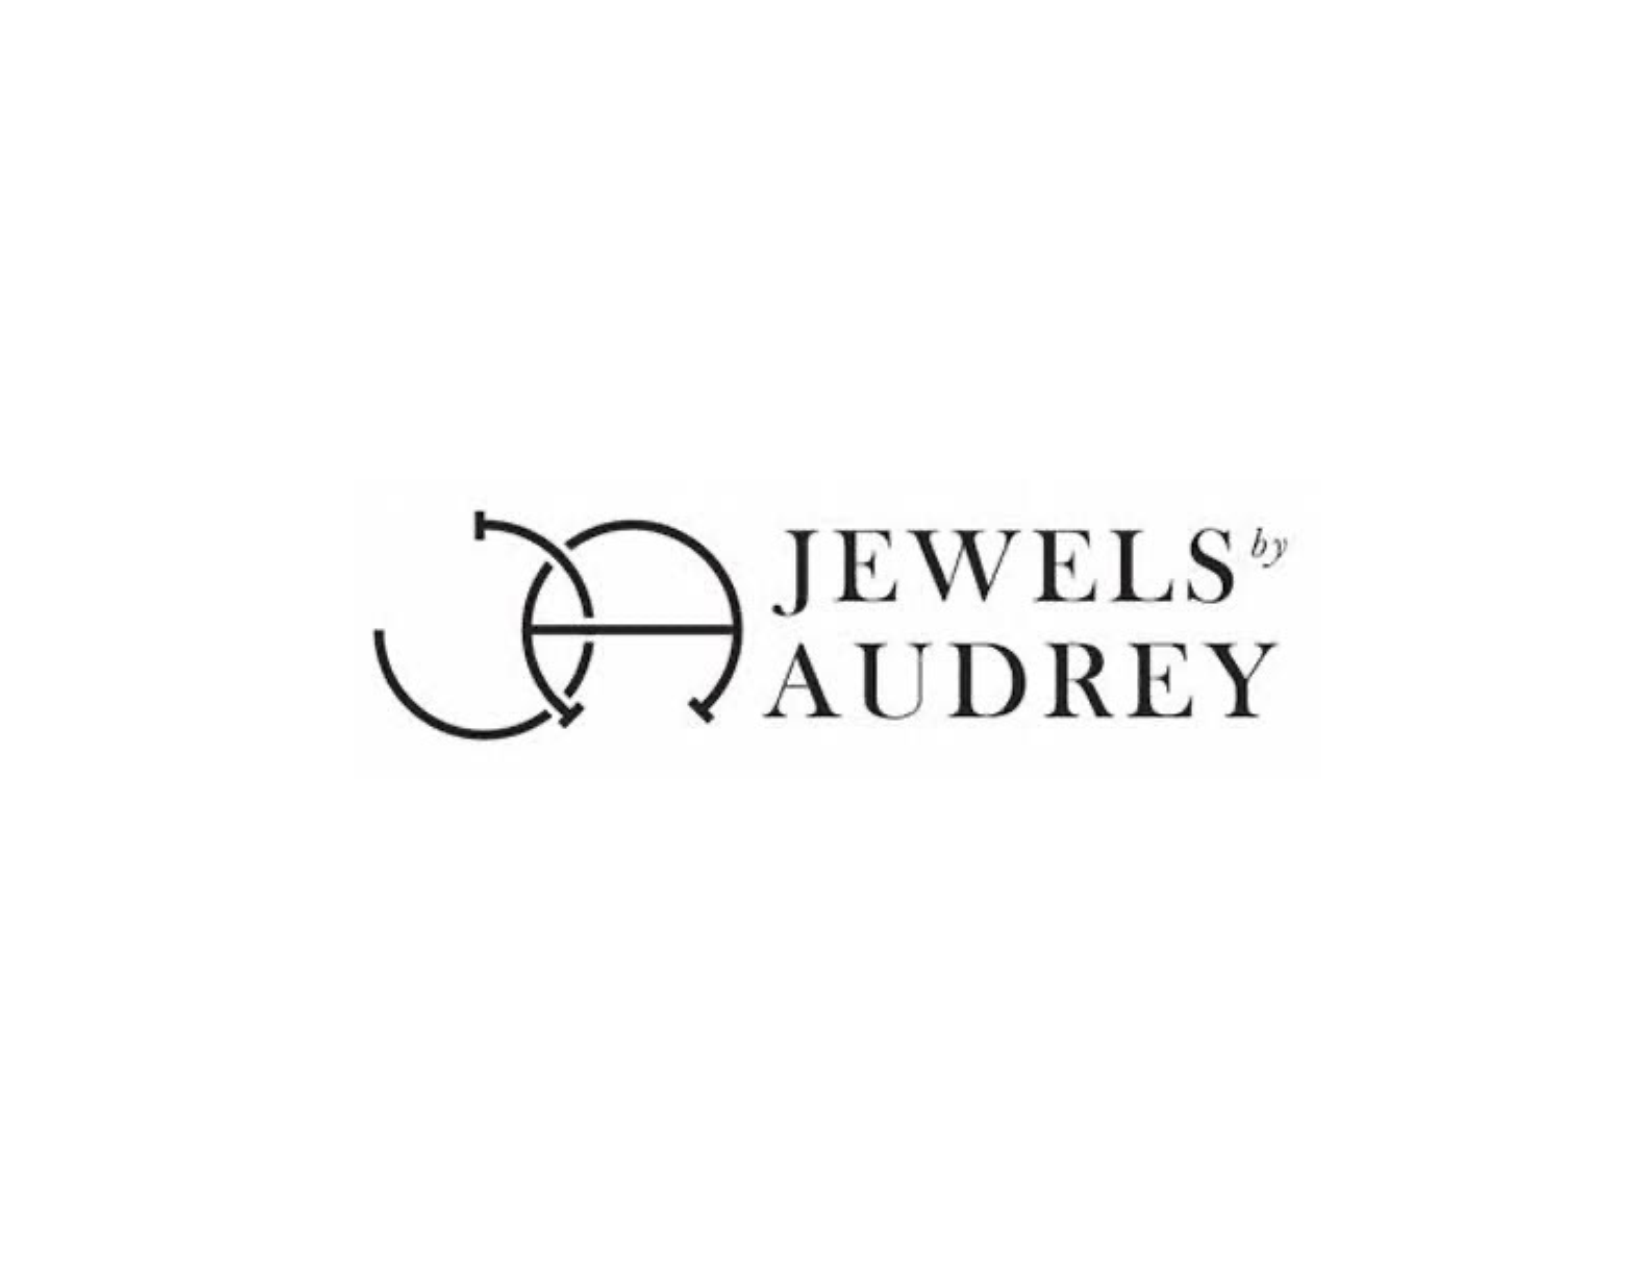 JEWELS BY AUDREY